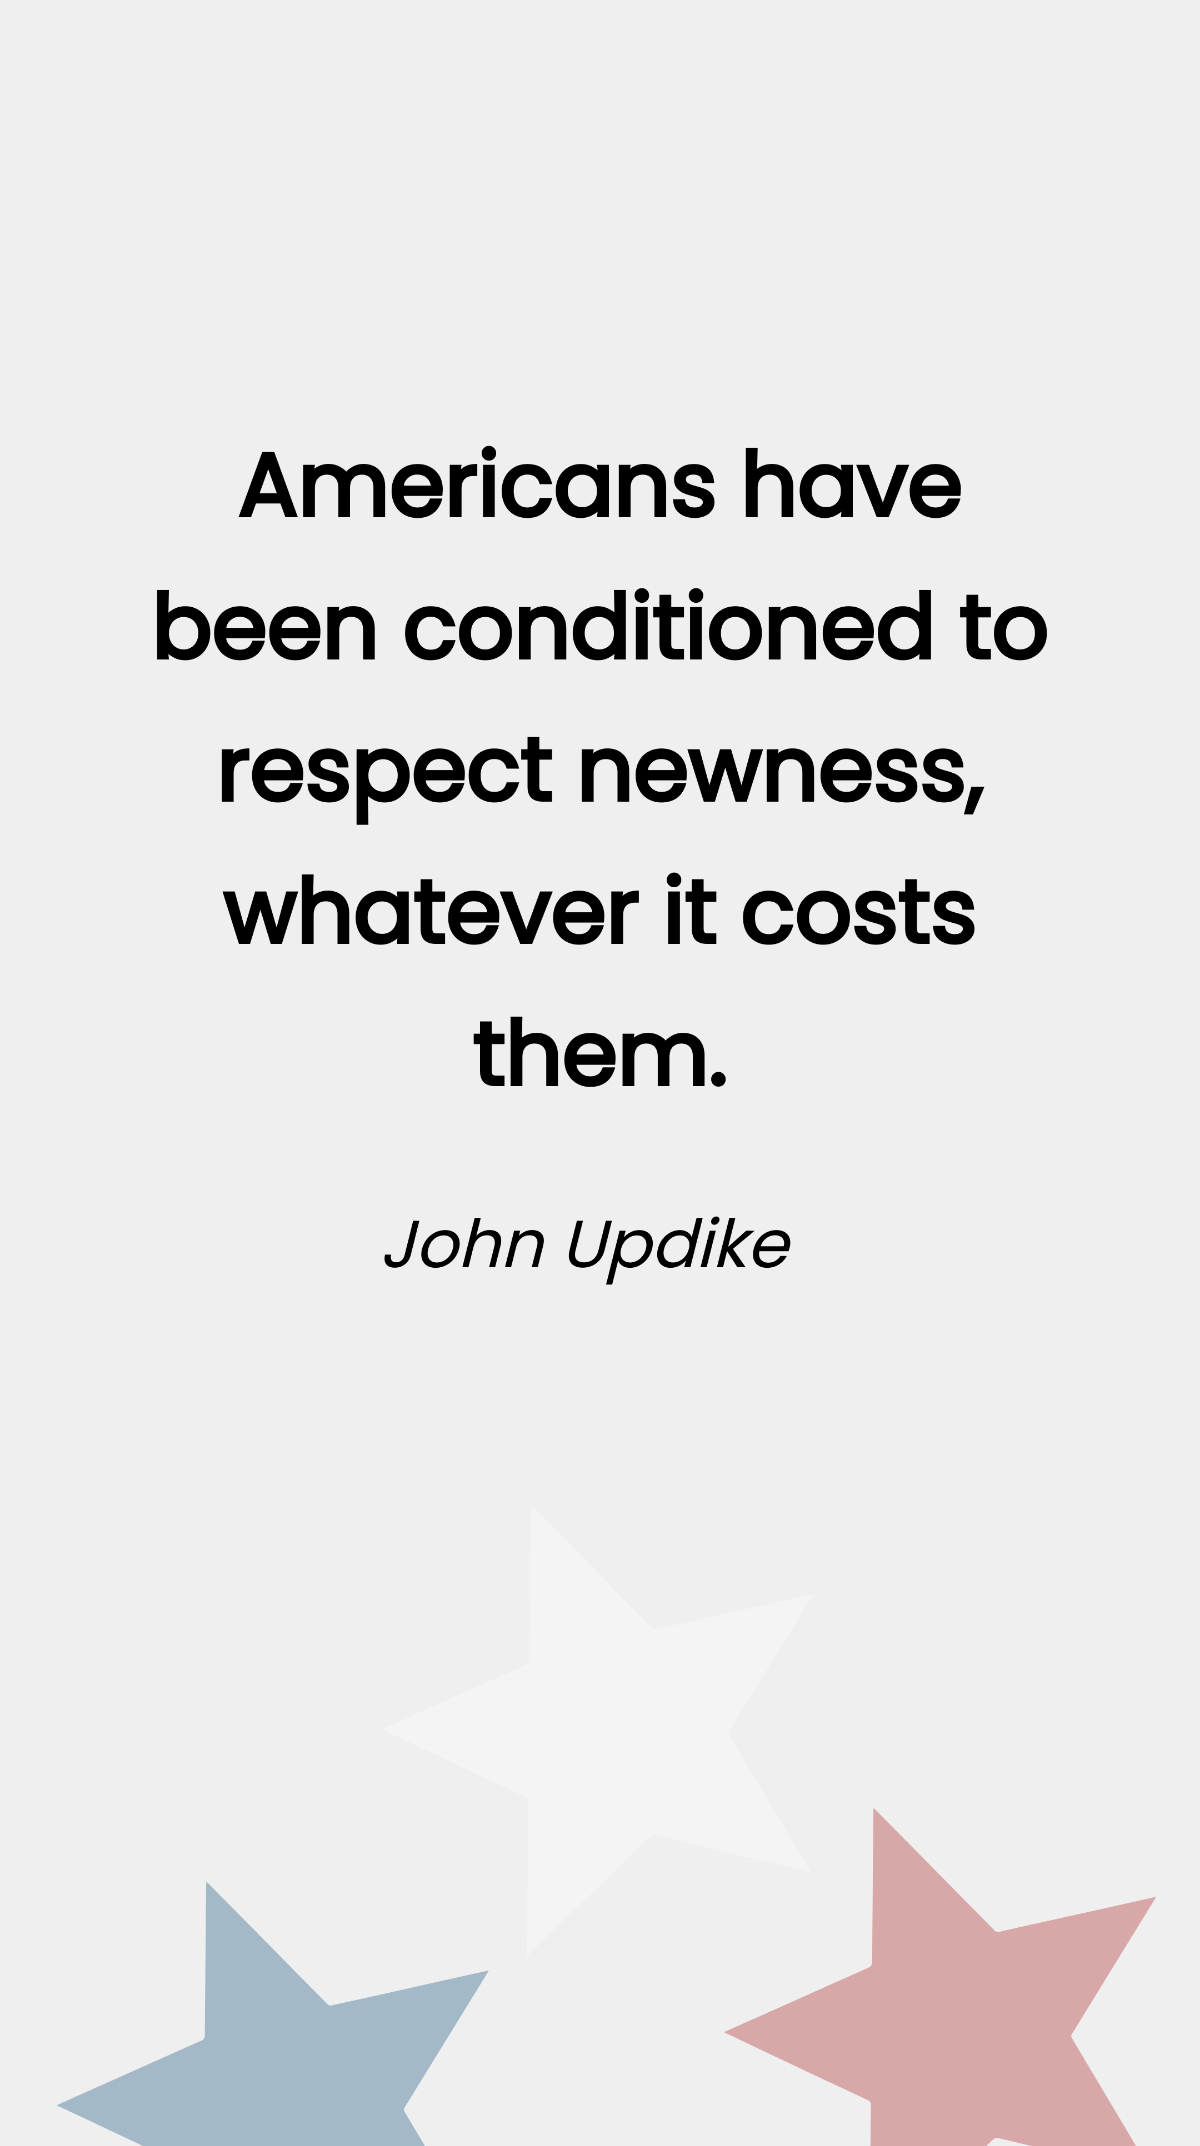 John Updike- Americans have been conditioned to respect newness, whatever it costs them. Template